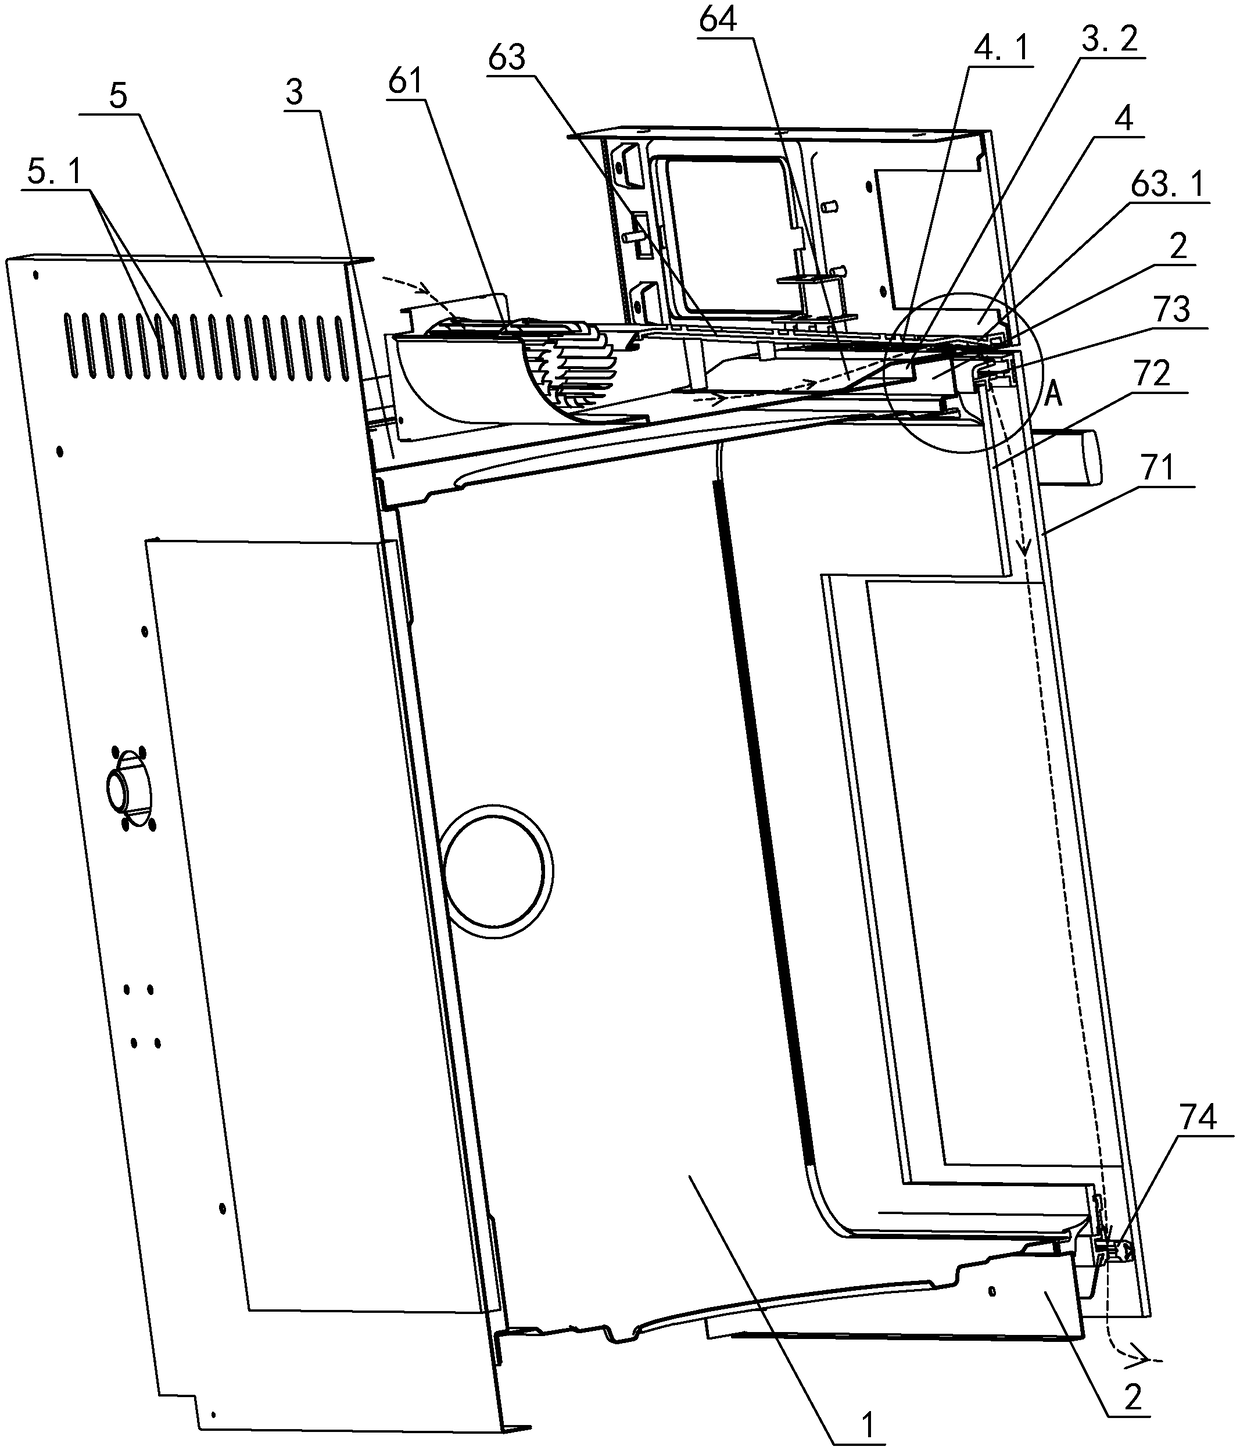 Cooling system of integrated cooker or electric oven body